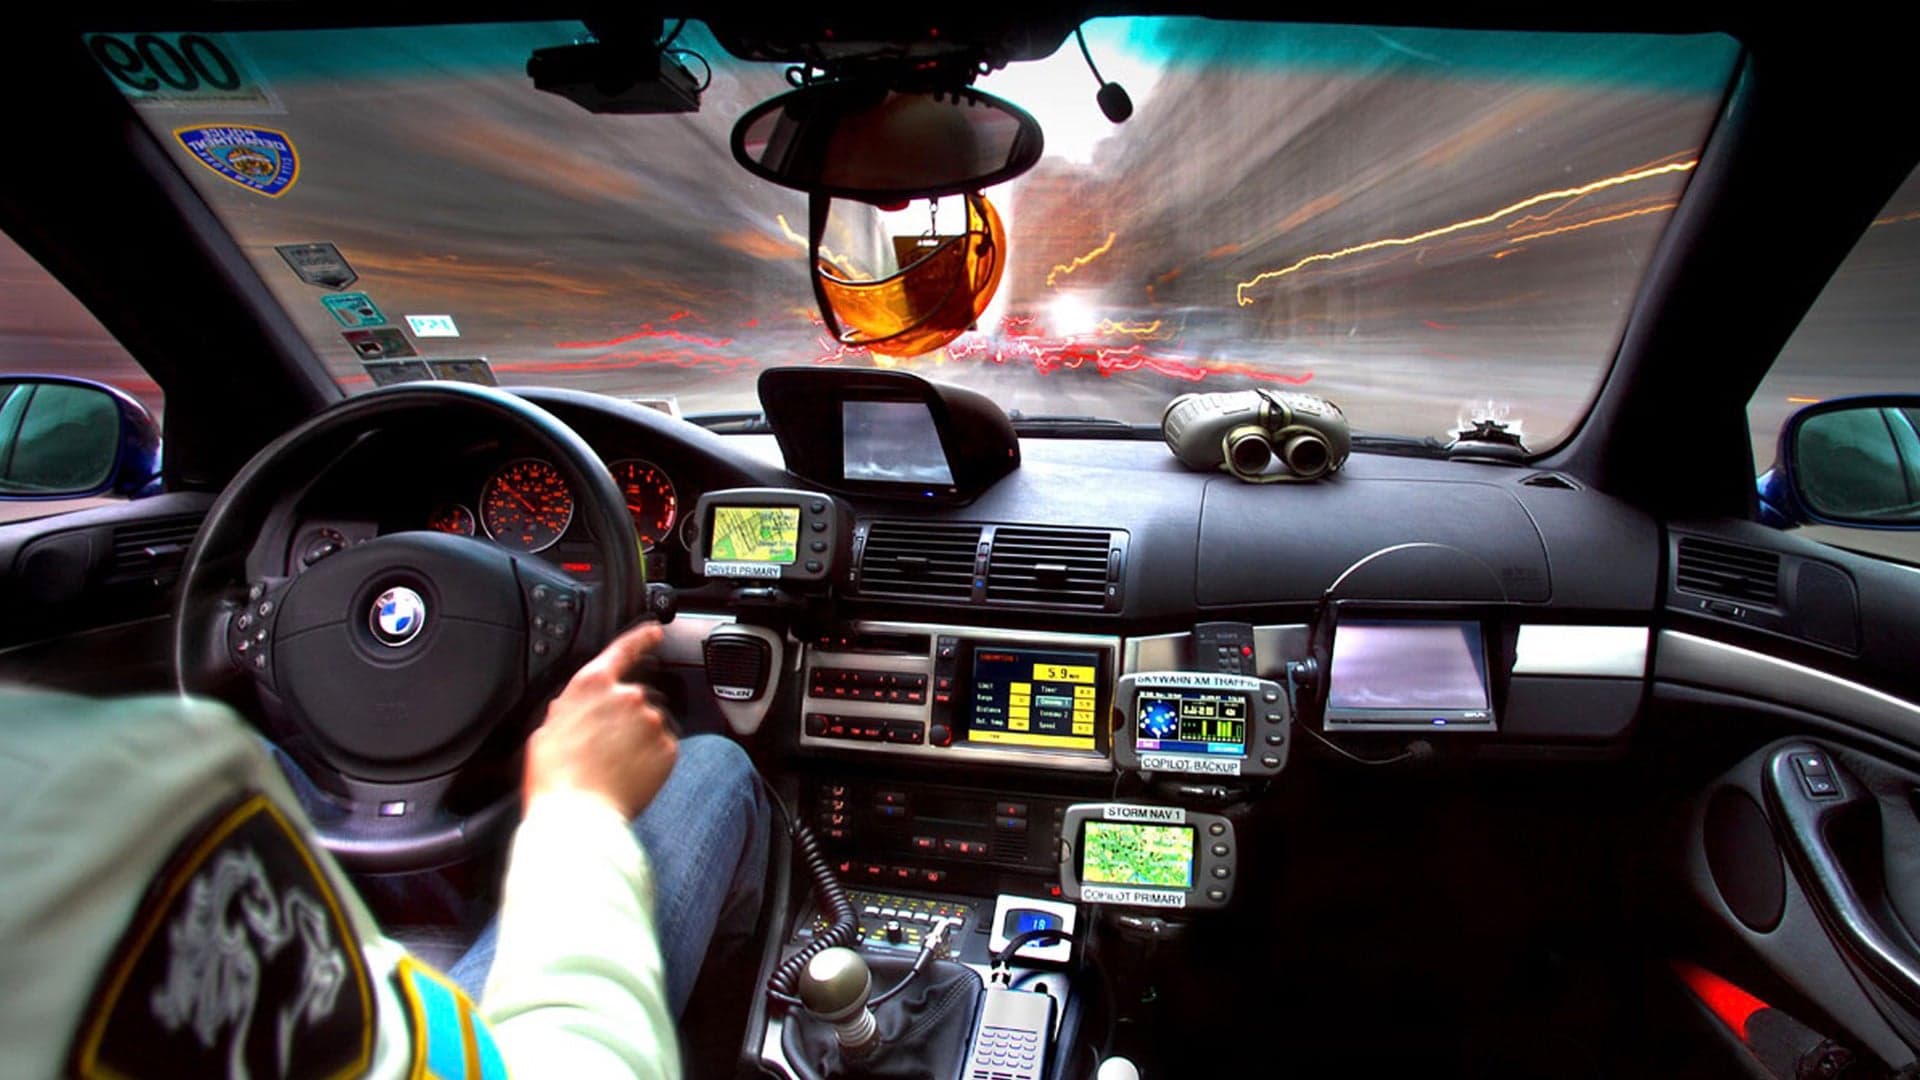 What Is The World’s Best Radar Detector?